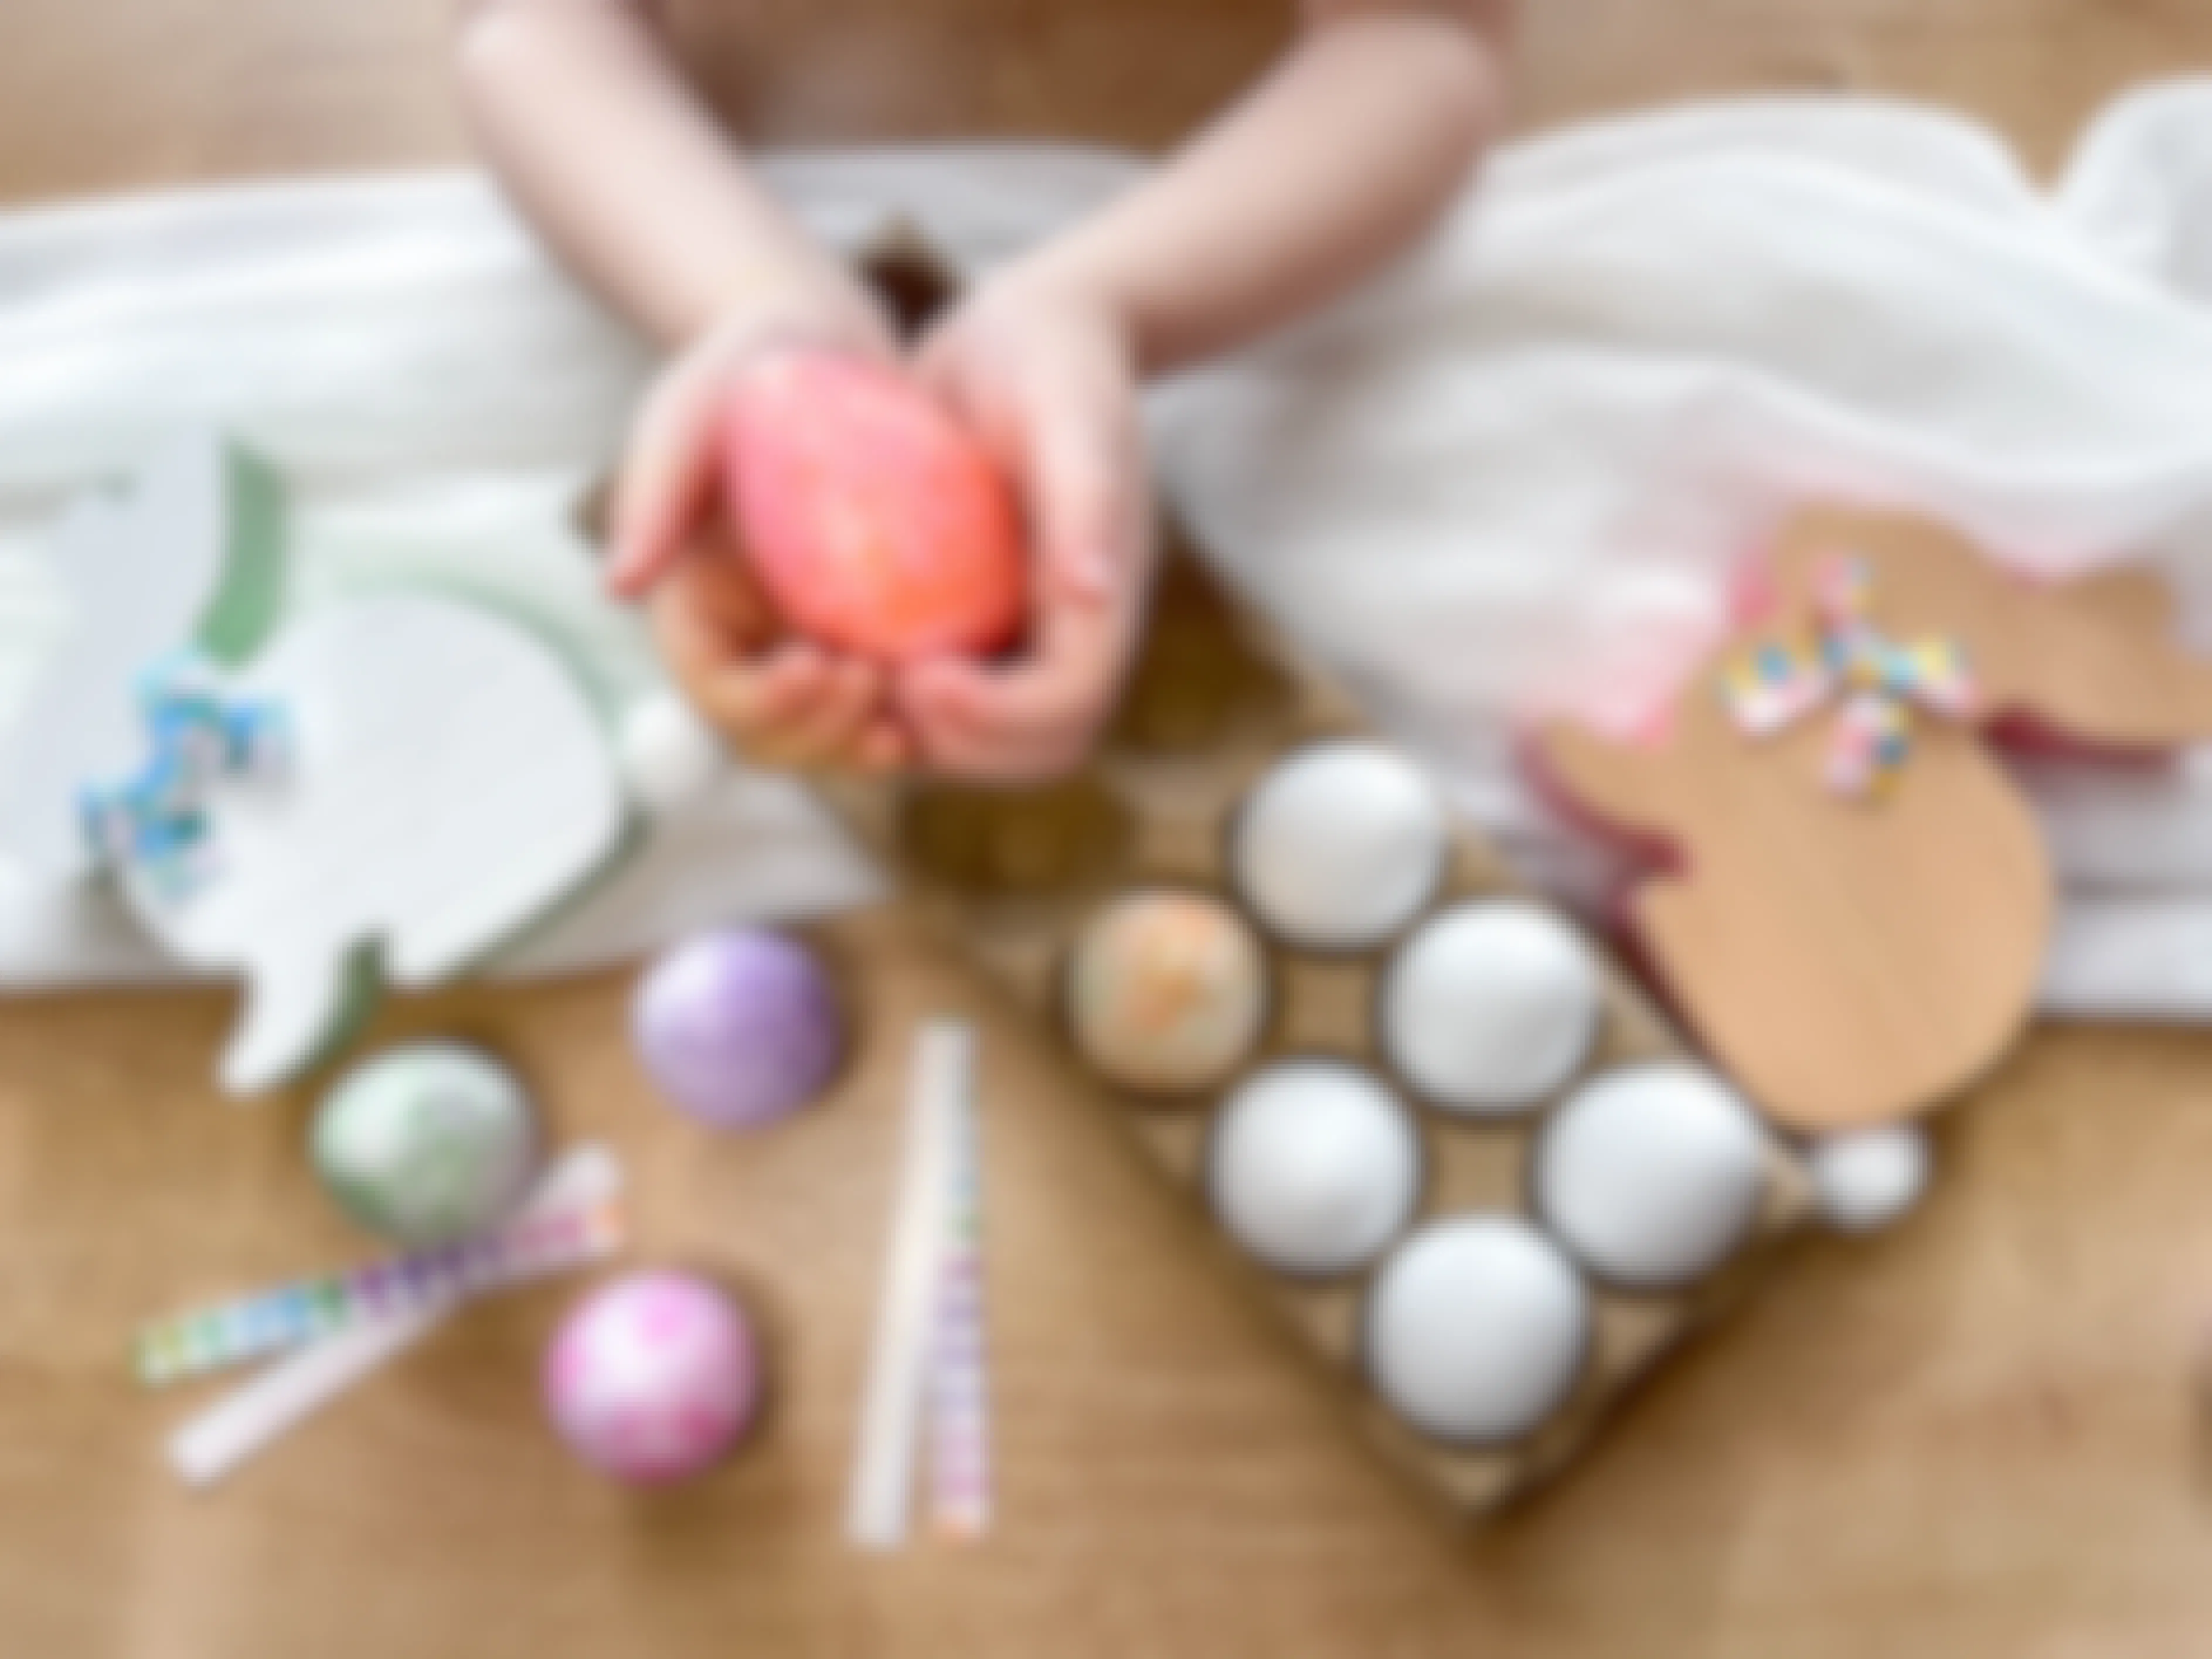 a kid holding a dyed egg near other plastic eggs and easter decor